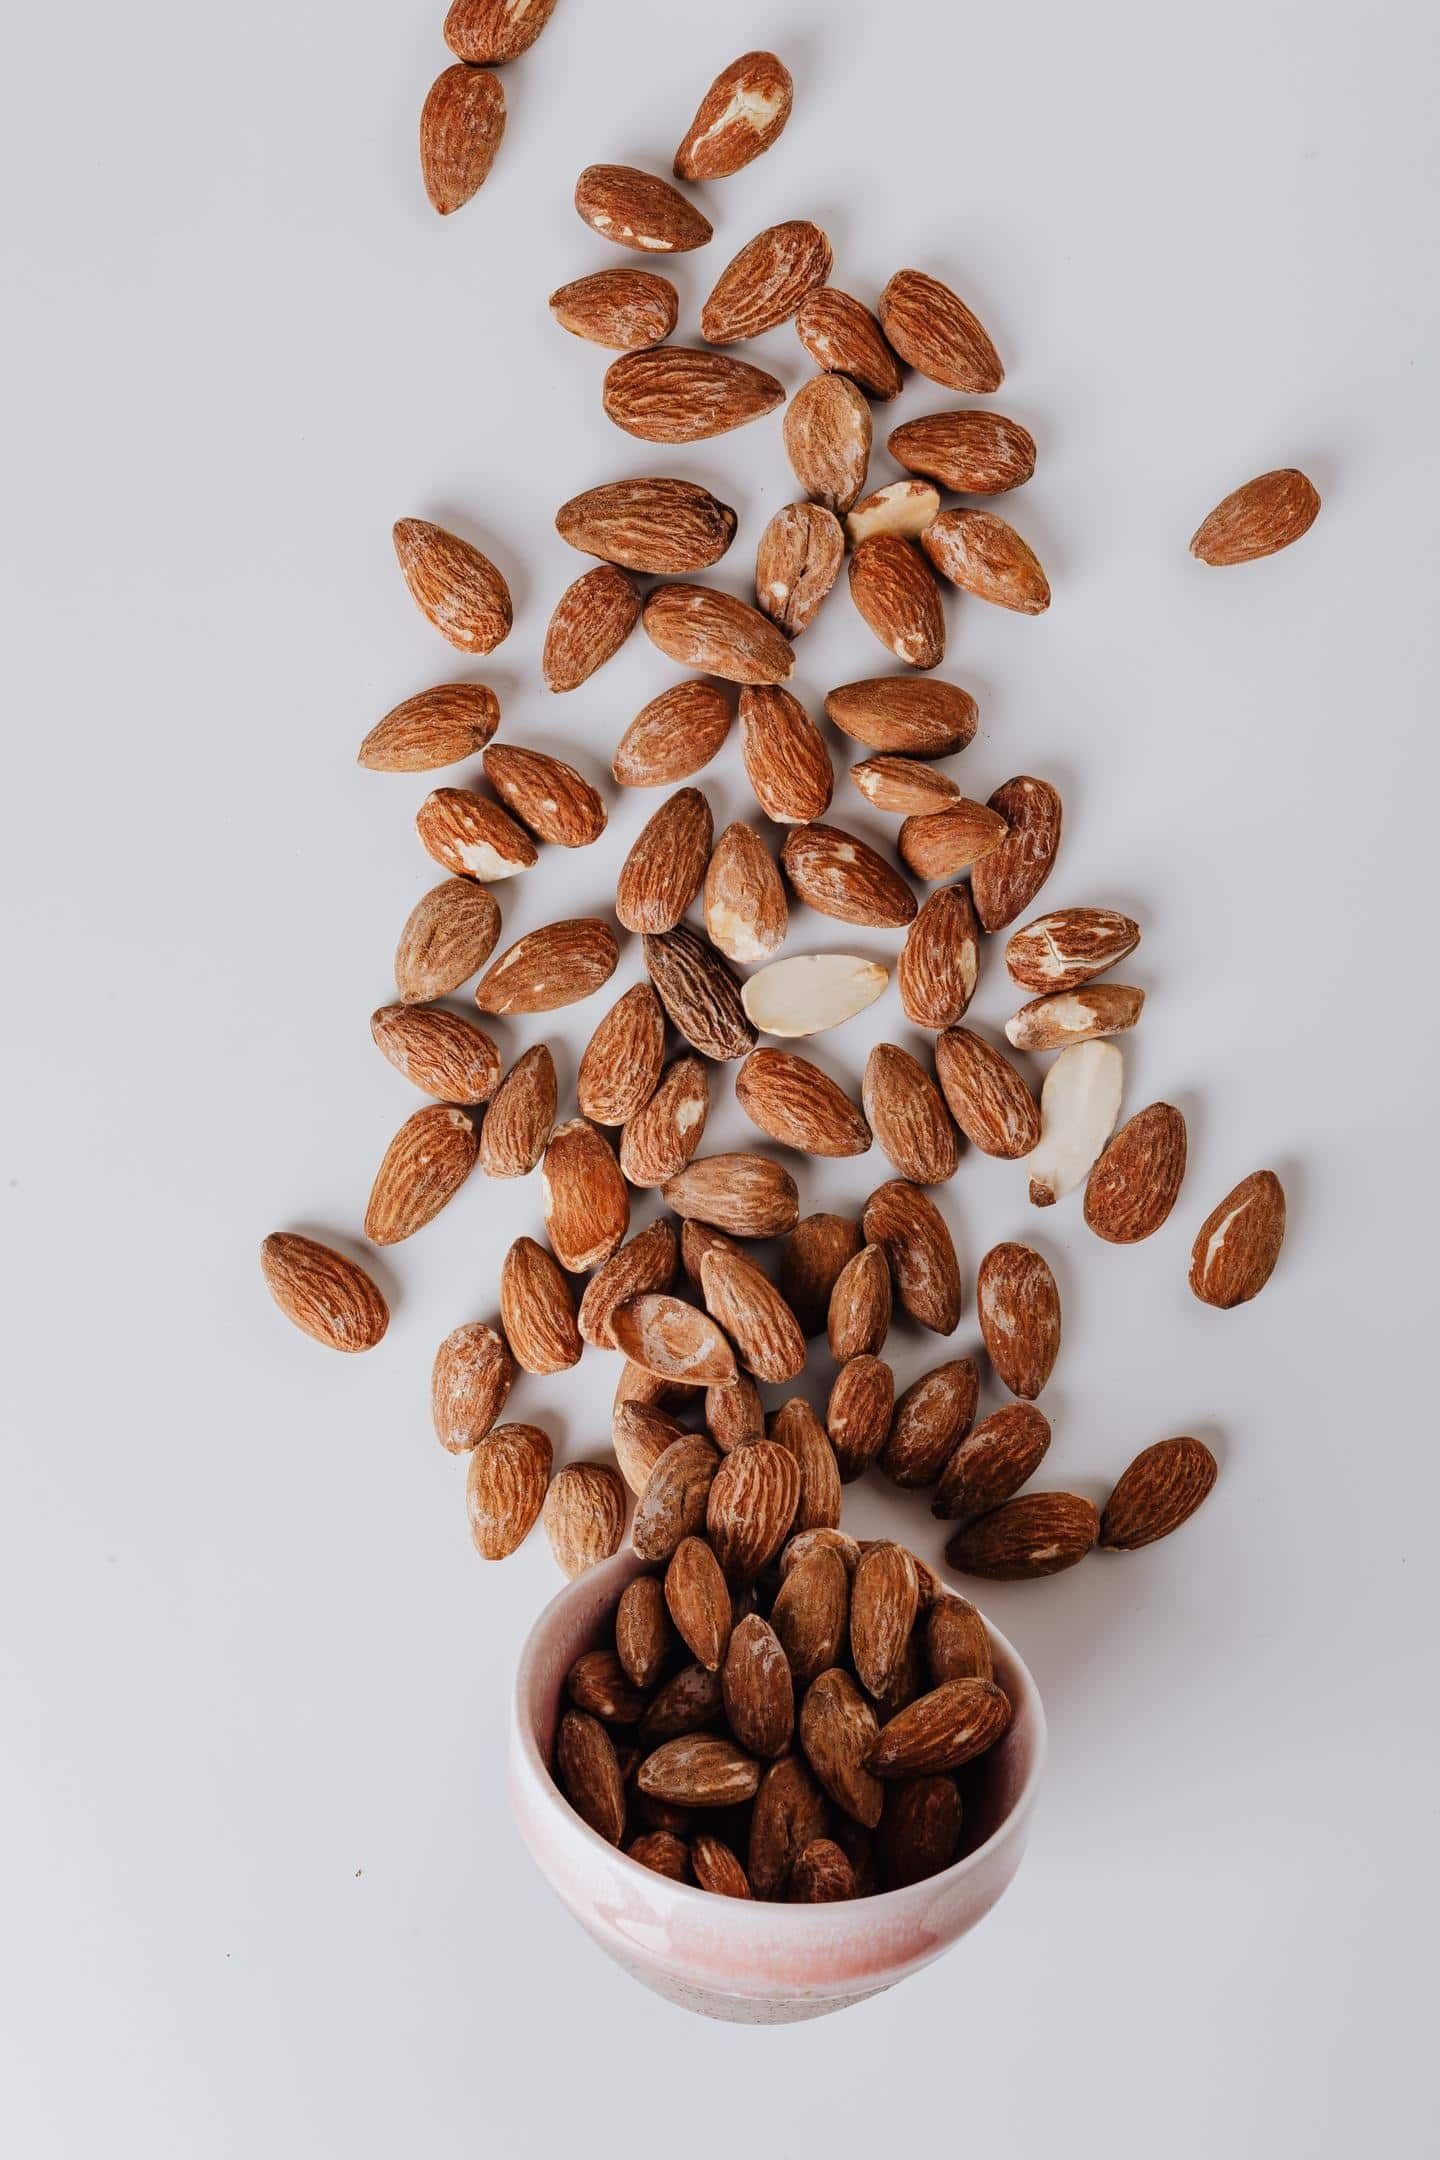 Almonds: A high-fat food, Protect the heart by maintaining levels of high density-lipoprotein. 1440x2160 HD Wallpaper.